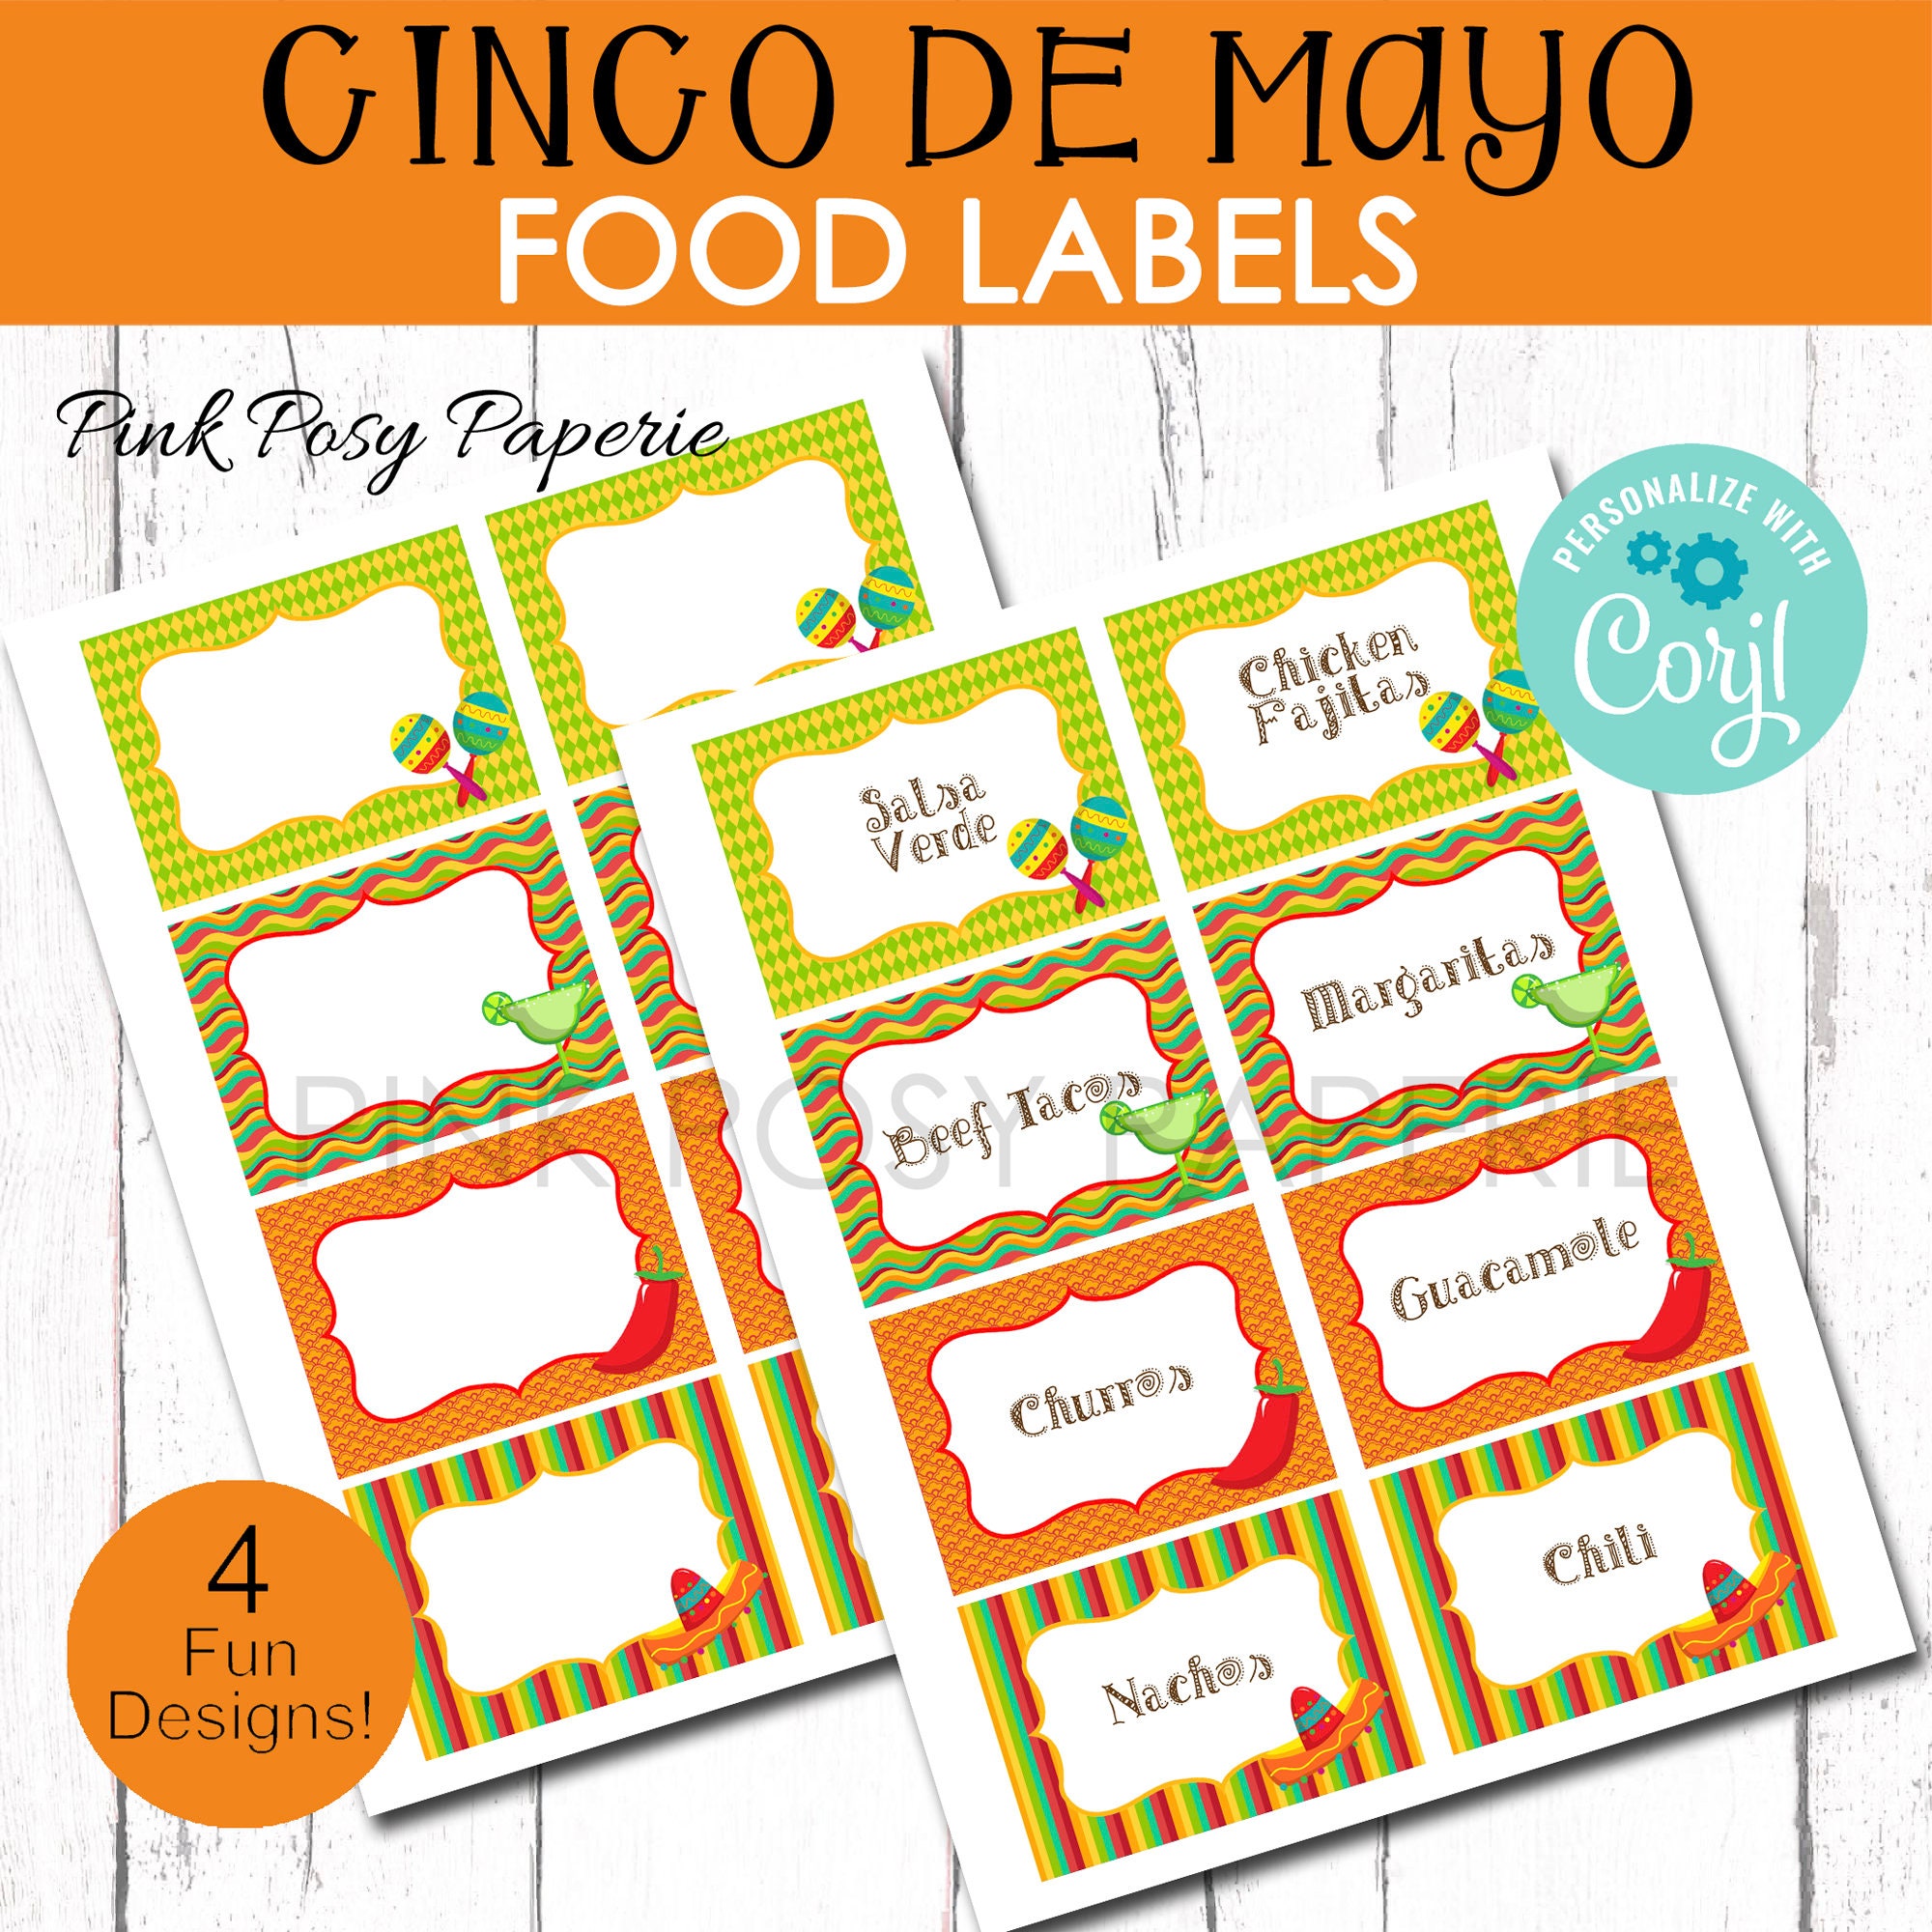 Made Especially for YouPersonalized Precut Woven Labels -15/pk.